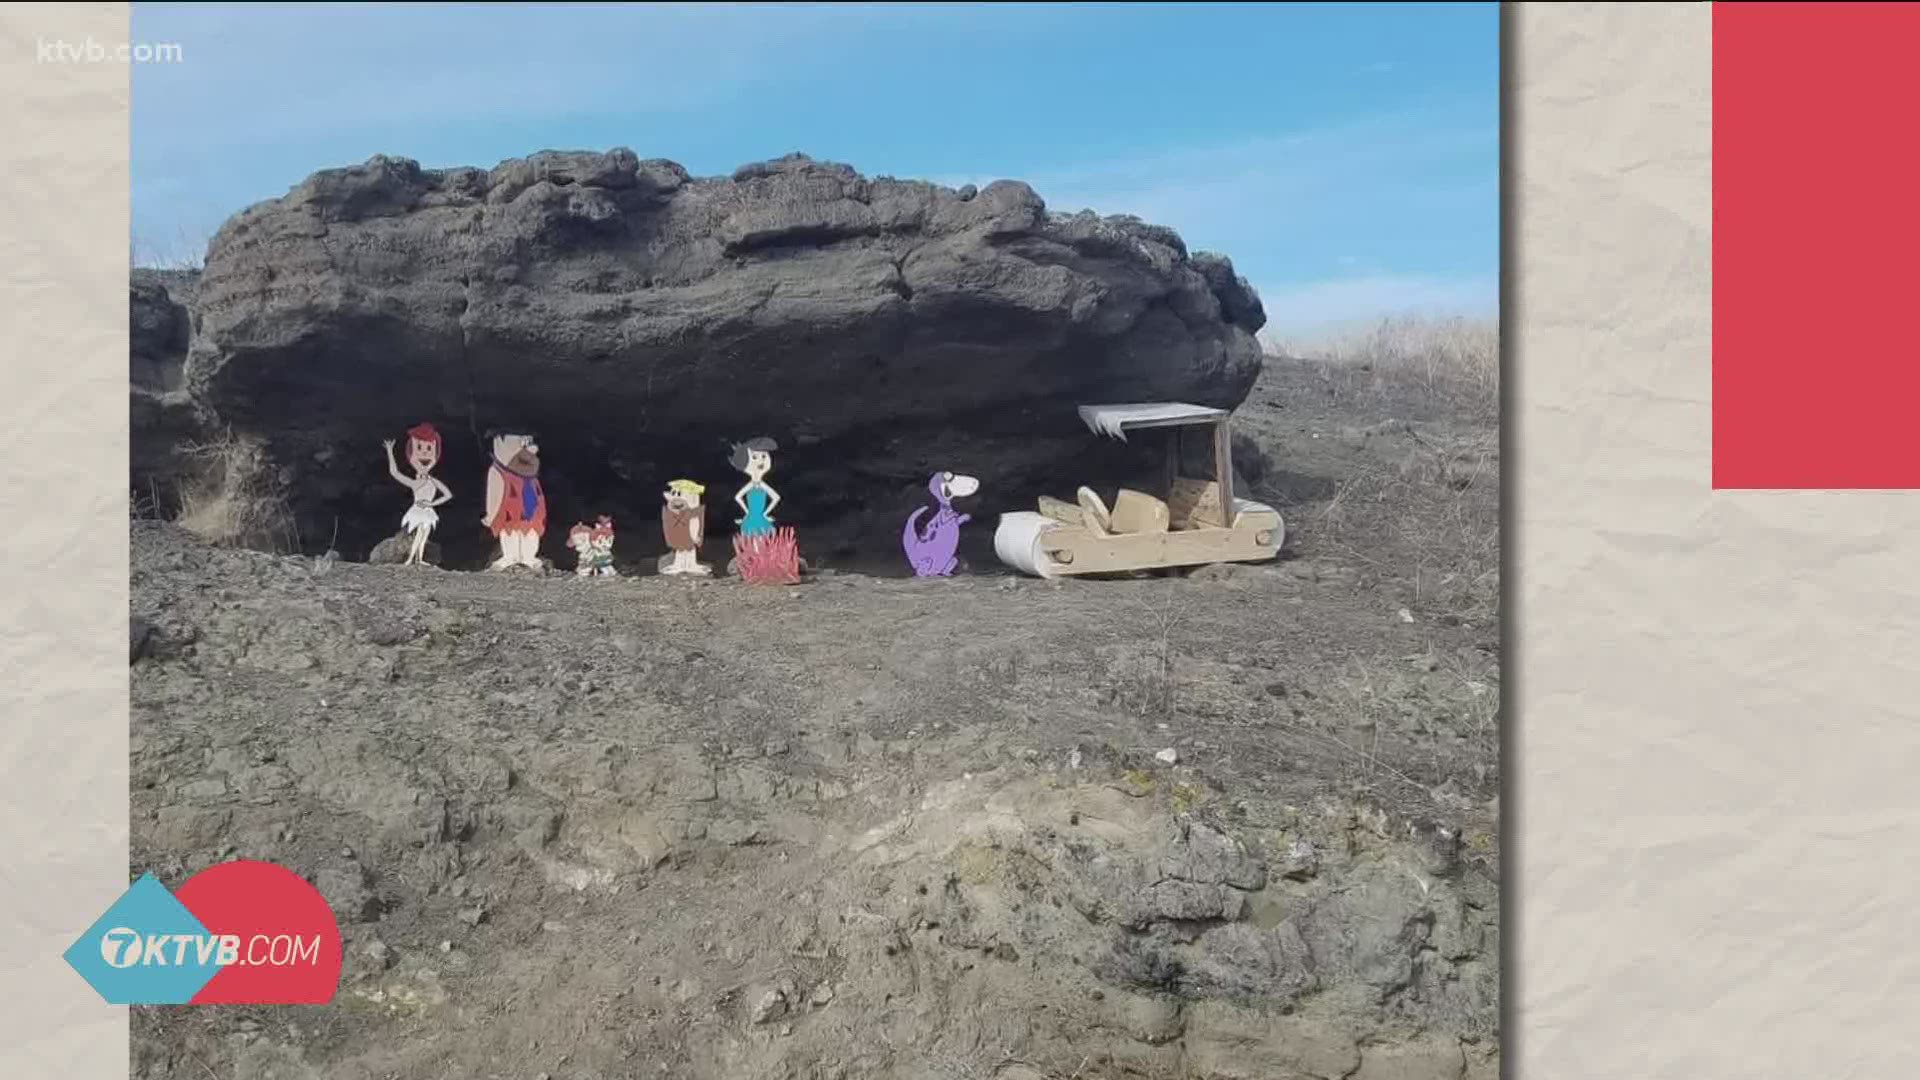 Ginny Wooley wanted to make people smile went she put the Flintstones characters under a rock overhang along Highway 167 between Mountain Home and Grandview.